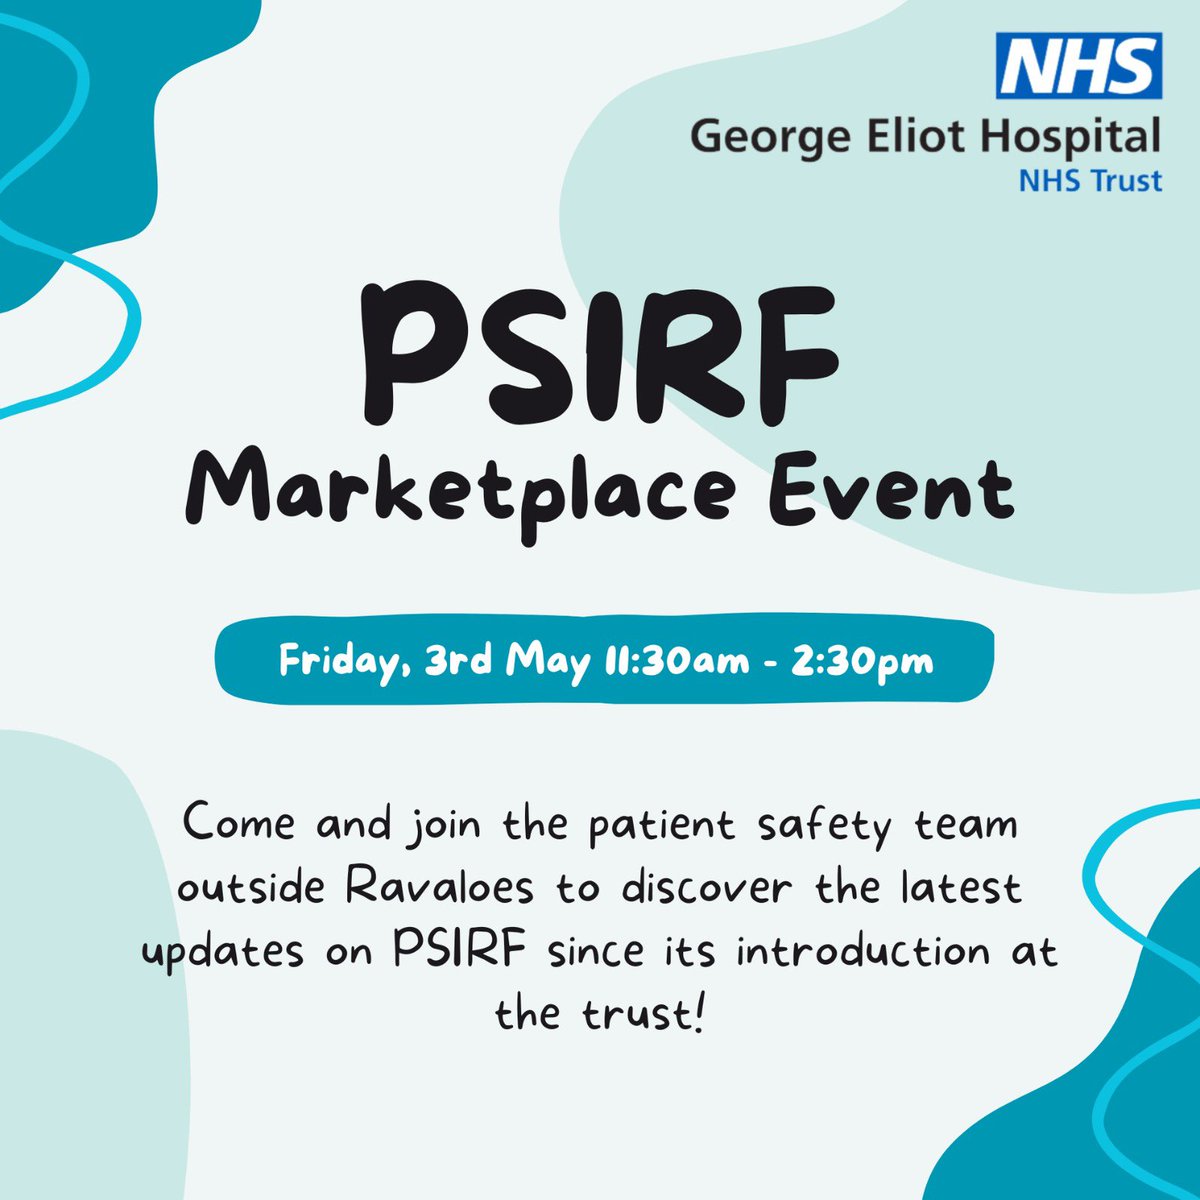 Come and join the #GEH Patient Safety team outside Ravaloes on Friday, 3rd May to discover the latest updates on #PSIRF since its introduction at the trust! #patientsafety #NHS 👇🏻